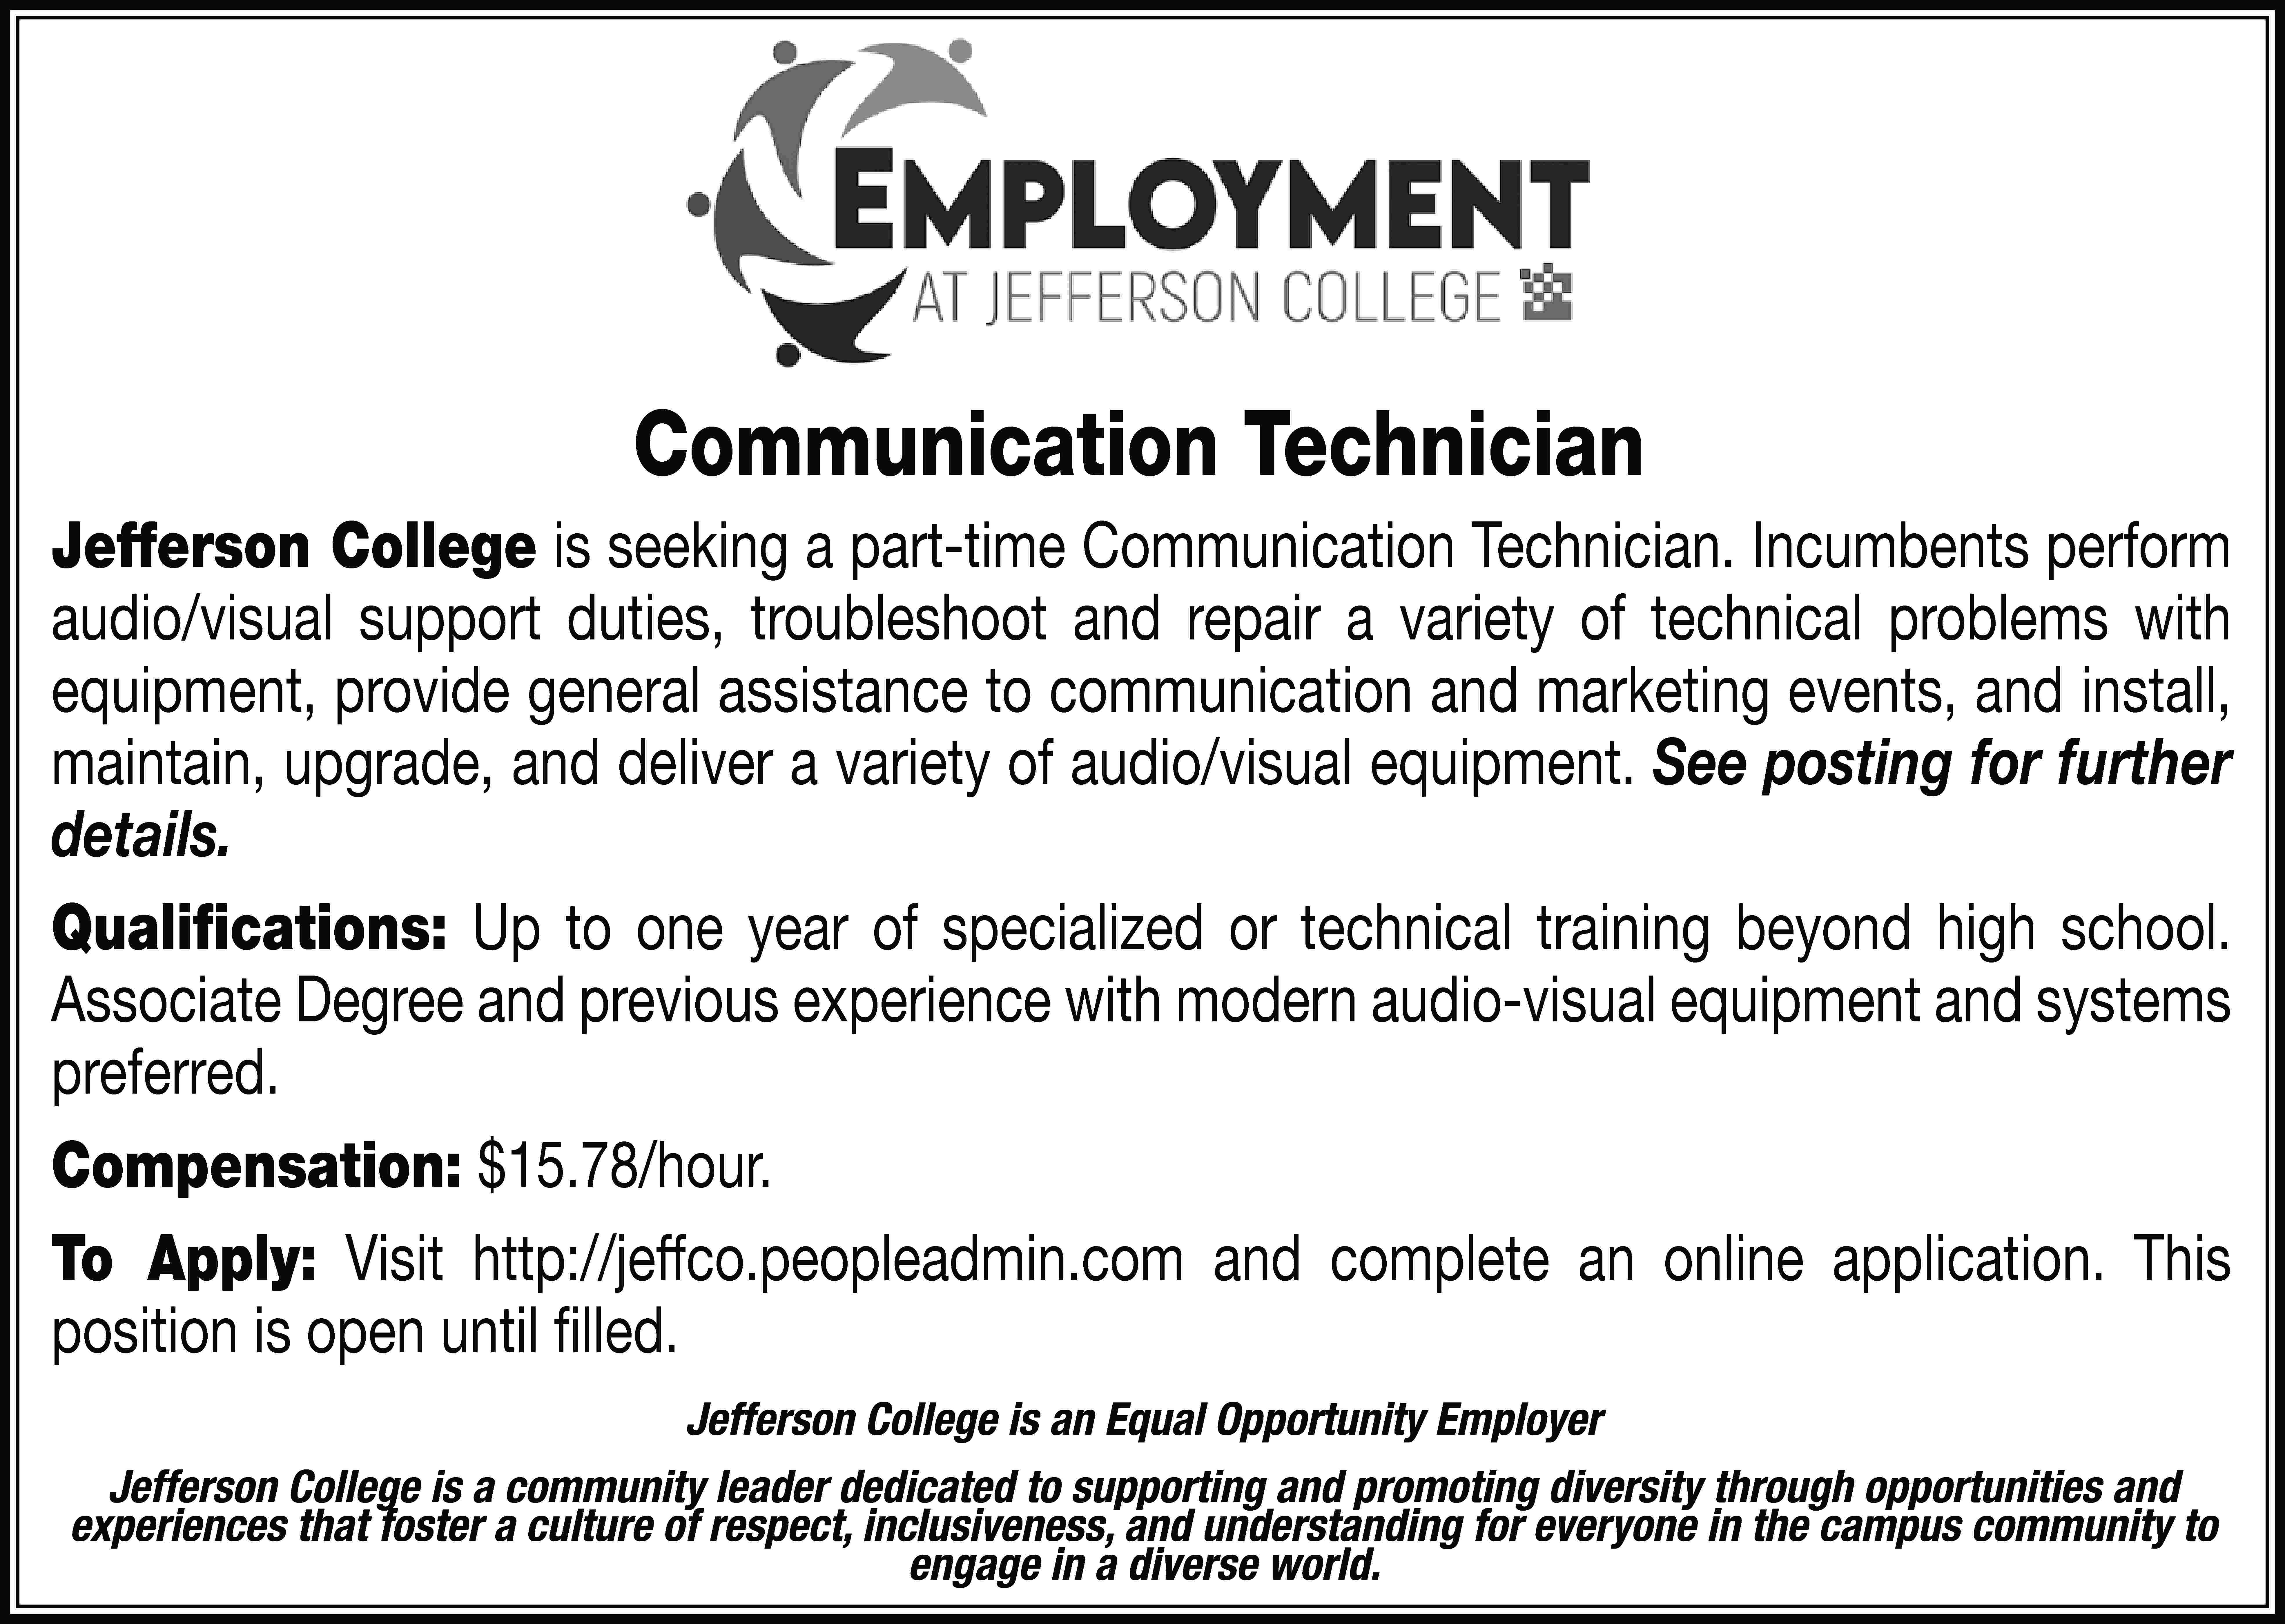 Communication Technician Jefferson College is  Communication Technician Jefferson College is seeking a part-time Communication Technician. Incumbents perform audio/visual support duties, troubleshoot and repair a variety of technical problems with equipment, provide general assistance to communication and marketing events, and install, maintain, upgrade, and deliver a variety of audio/visual equipment. See posting for further details. Qualifications: Up to one year of specialized or technical training beyond high school. Associate Degree and previous experience with modern audio-visual equipment and systems preferred. Compensation: $15.78/hour. To Apply: Visit http://jeffco.peopleadmin.com and complete an online application. This position is open until filled. Jefferson College is an Equal Opportunity Employer Jefferson College is a community leader dedicated to supporting and promoting diversity through opportunities and experiences that foster a culture of respect, inclusiveness, and understanding for everyone in the campus community to engage in a diverse world.